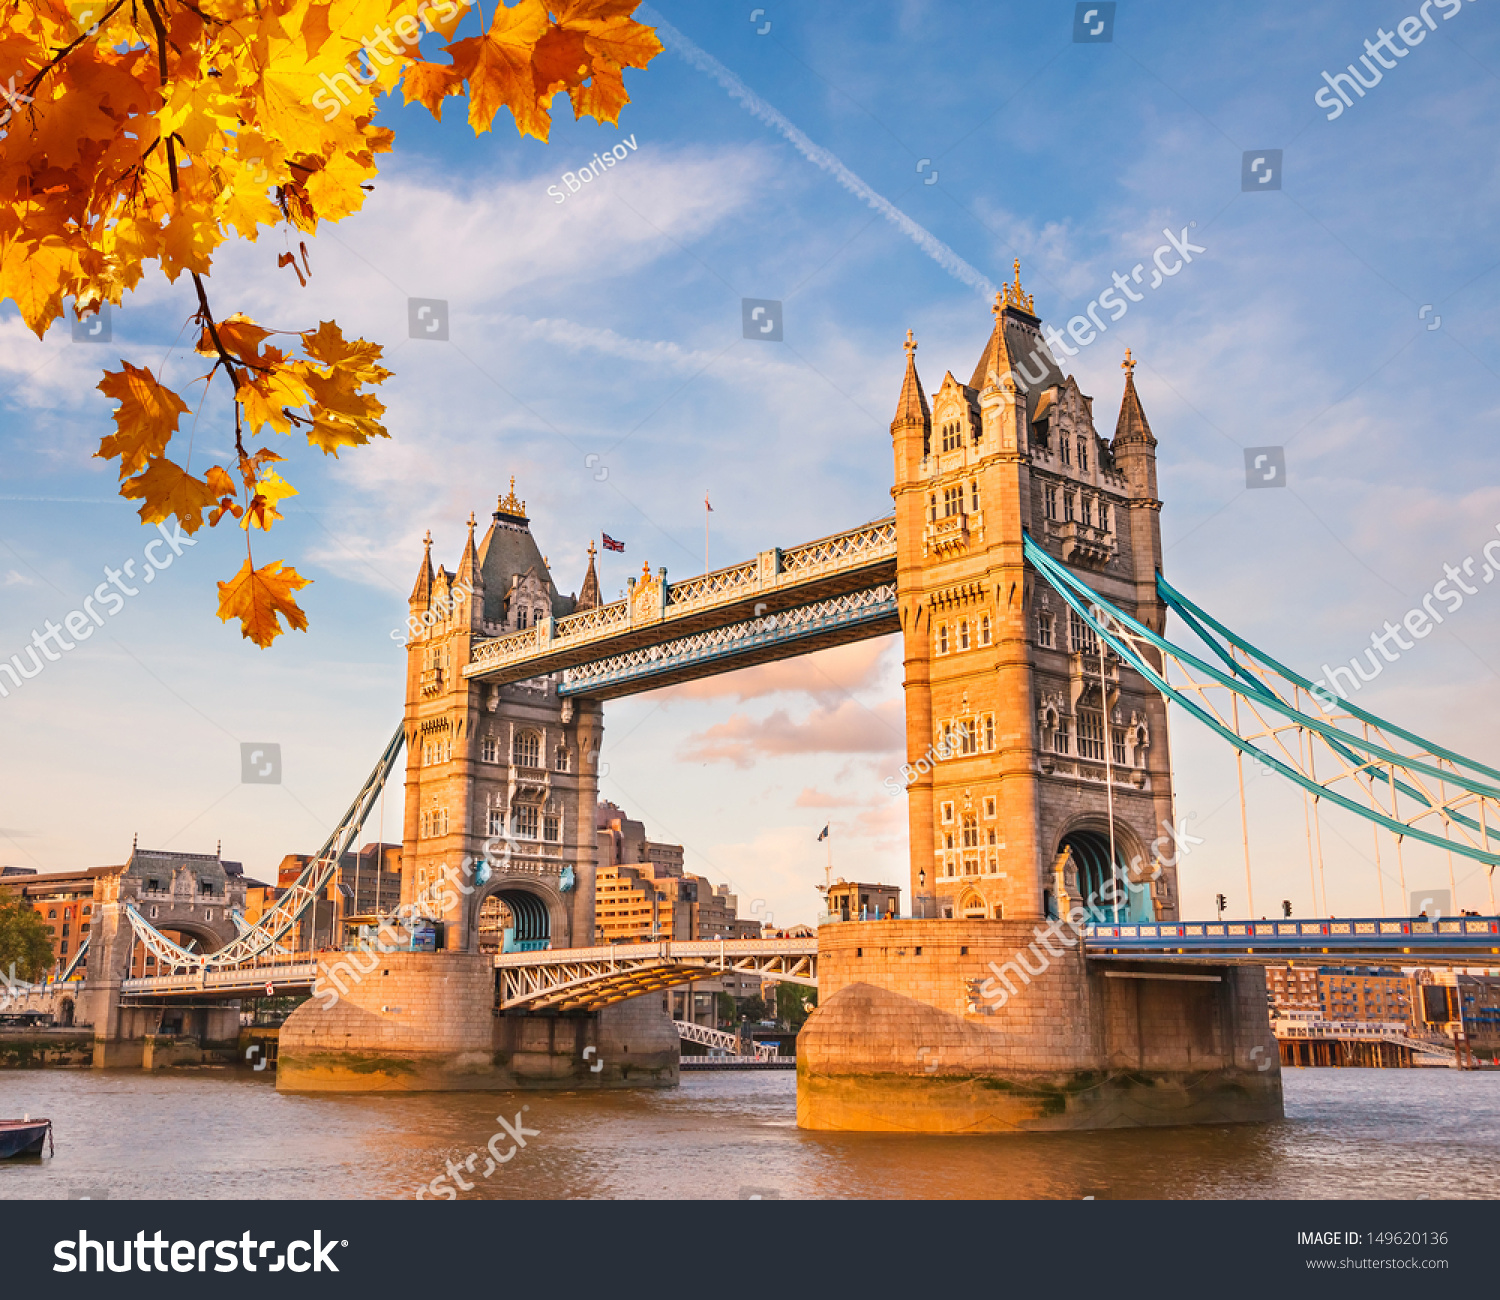 Tower bridge with autumn leaves, London #149620136